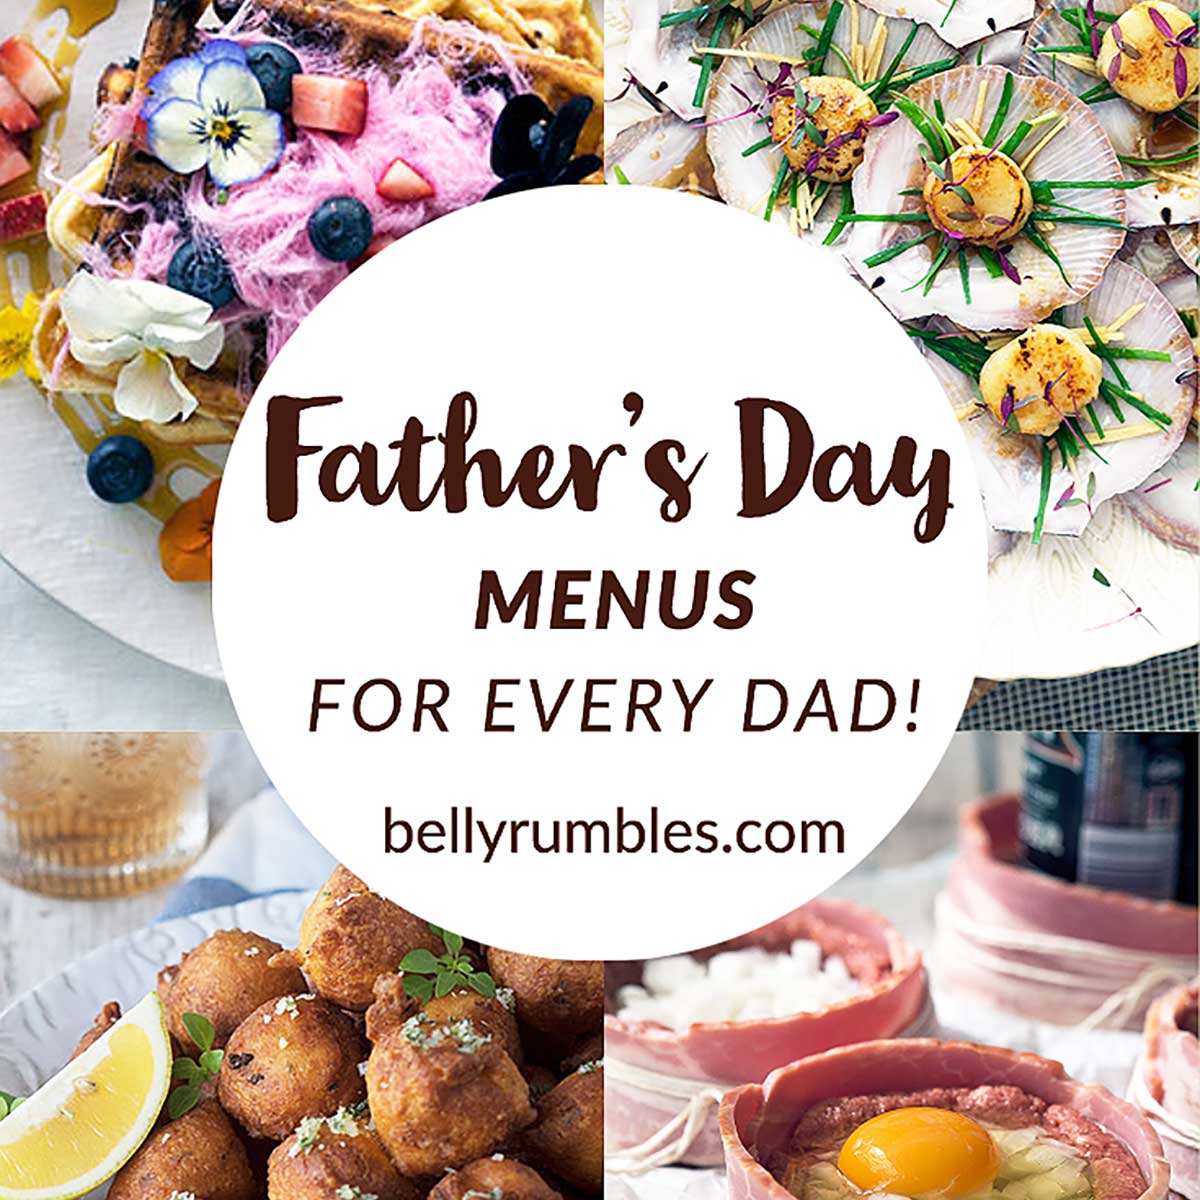 UNCONVENTIONAL BRUNCH RECIPES TO WHIP UP THIS FATHER'S DAY